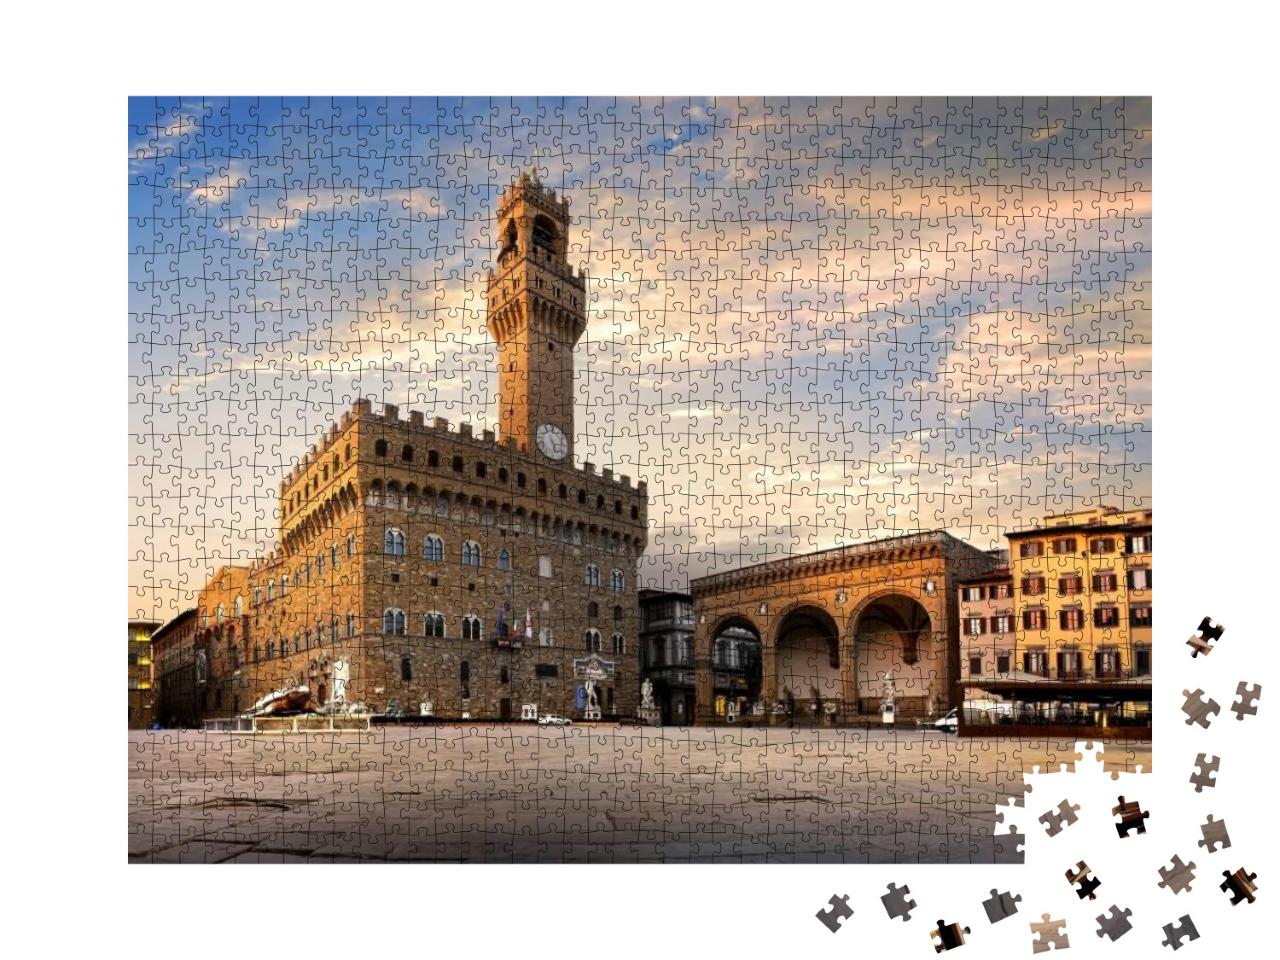 Square of Signoria in Florence At Sunrise, Italy... Jigsaw Puzzle with 1000 pieces